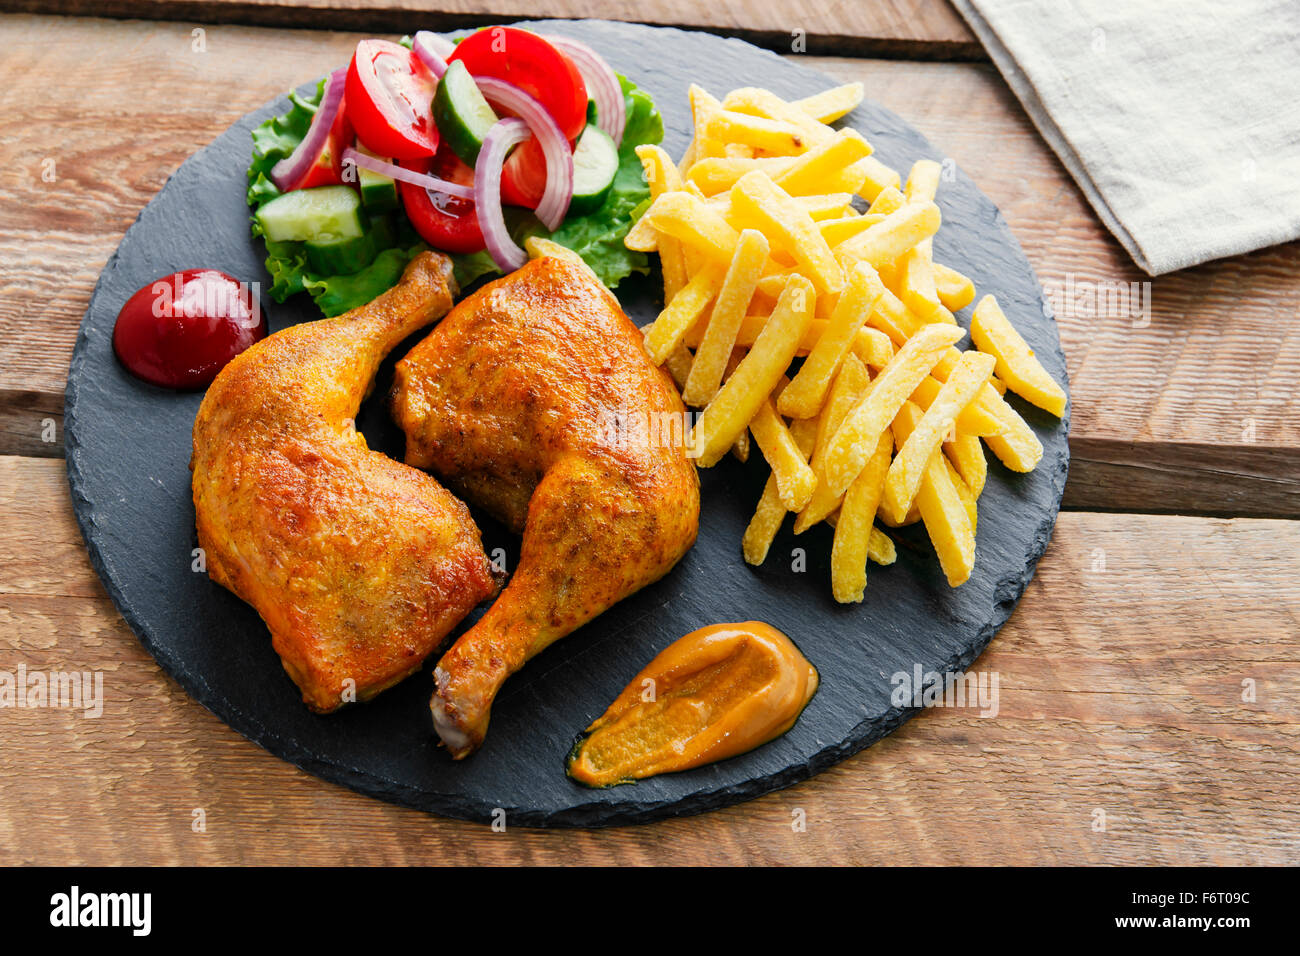 roasted chicken legs with french fries and salad Stock Photo - Alamy